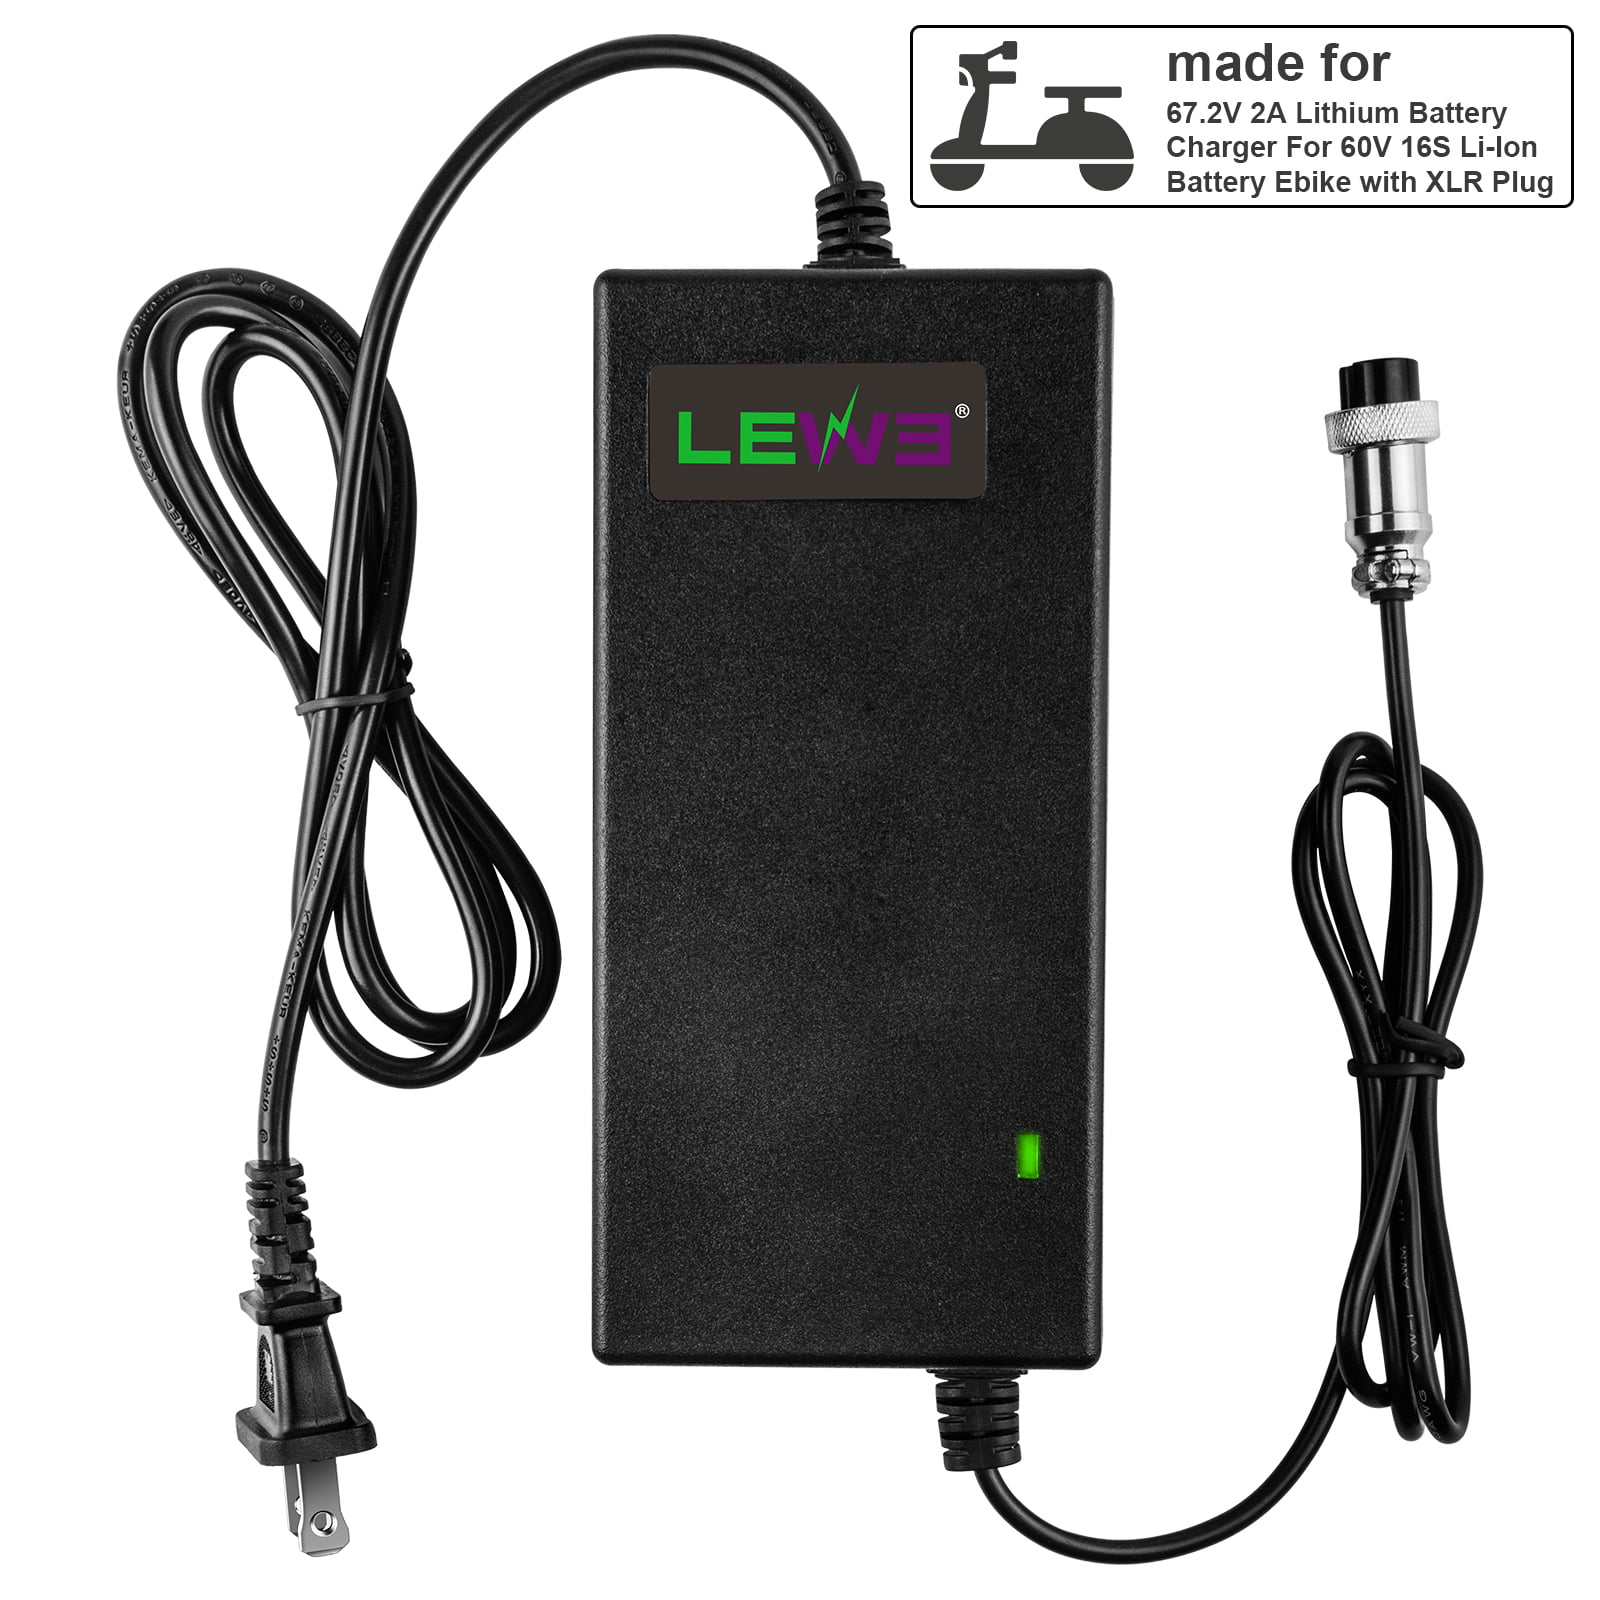 5-Types Of Plugs 60V/48V 2A Lithium Battery Charger Power Adapter